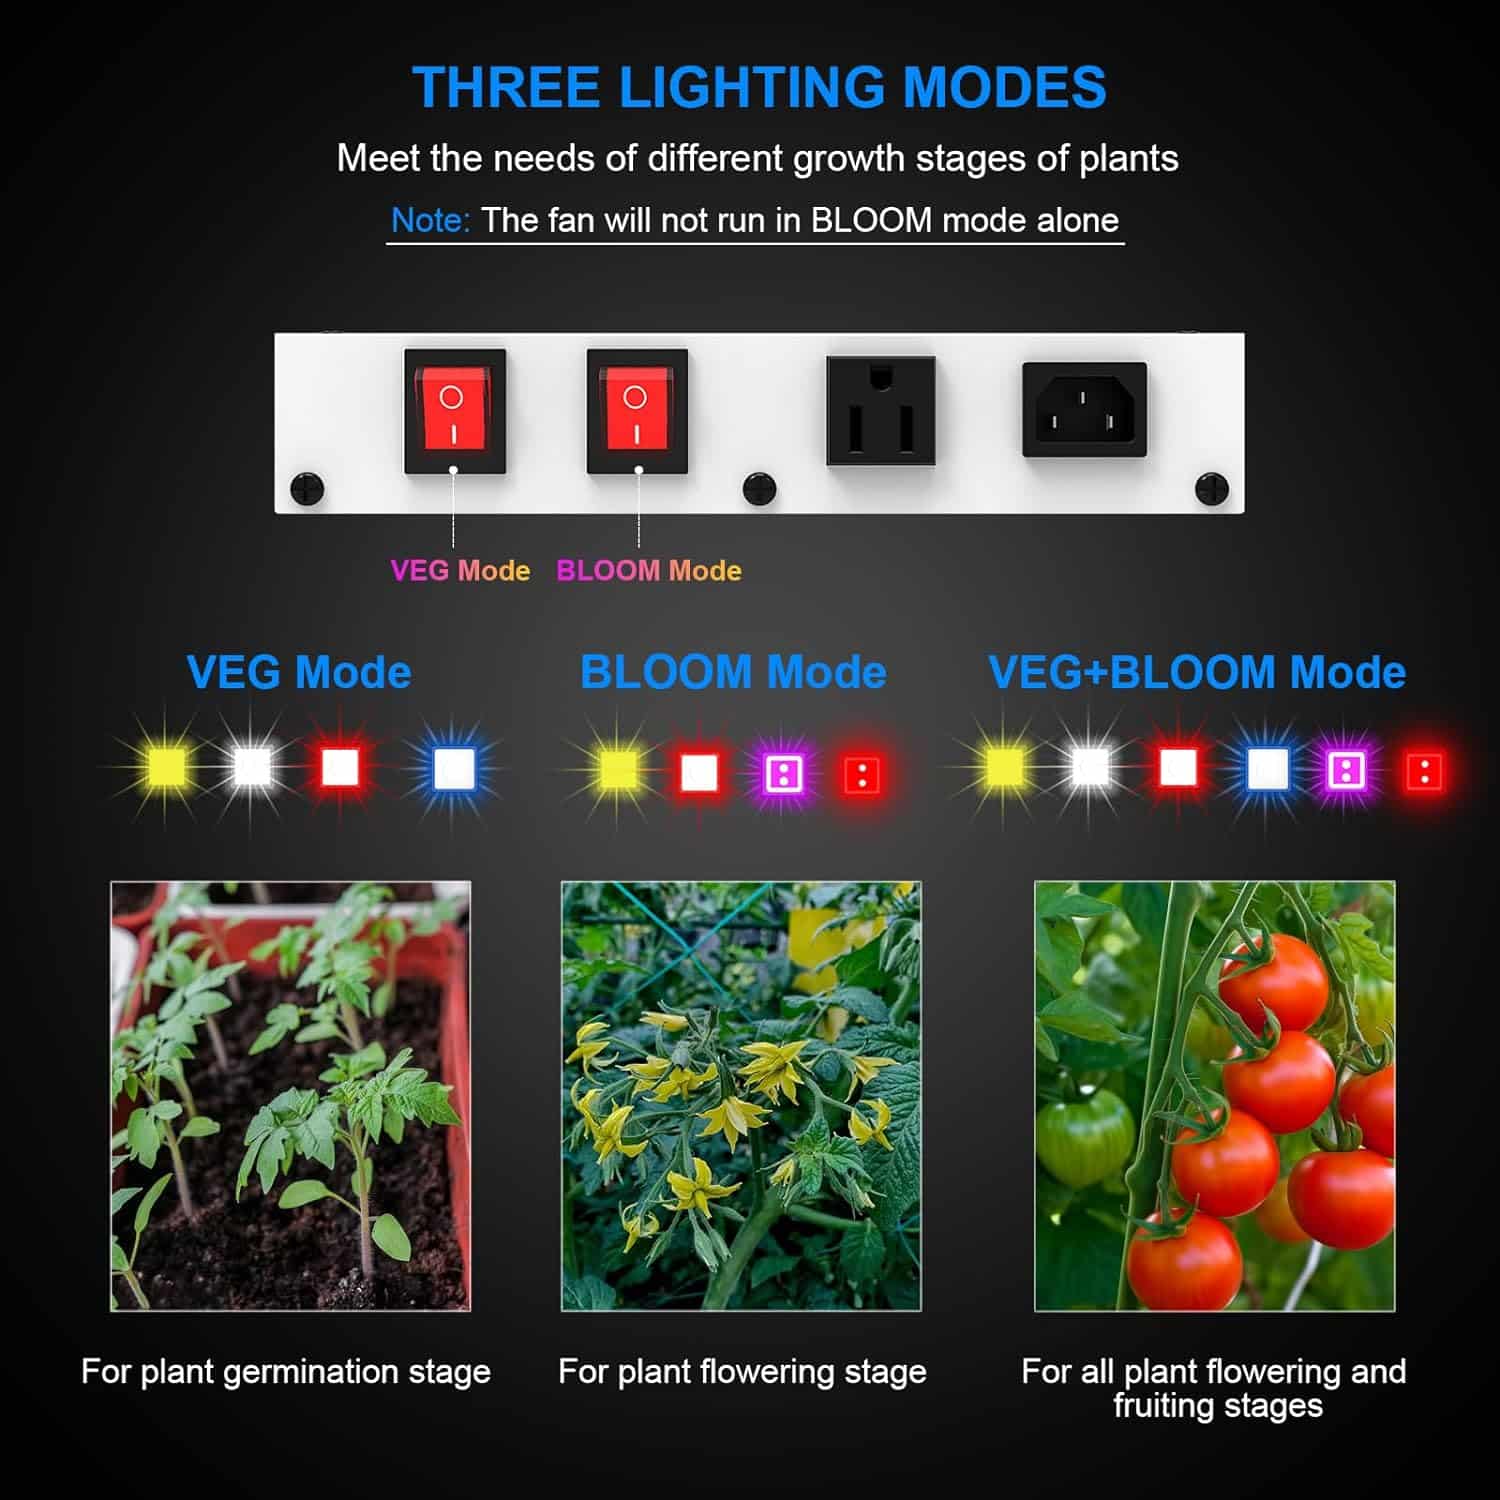 TMLAPY E2000 Led Grow Lights Full Spectrum, Grow Lights for Indoor Plants with IR UV, Plant Grow Light with Daisy Chain, Growing Lamp for Seedling Vegs in 2x3 Grow Tent Greenhouse